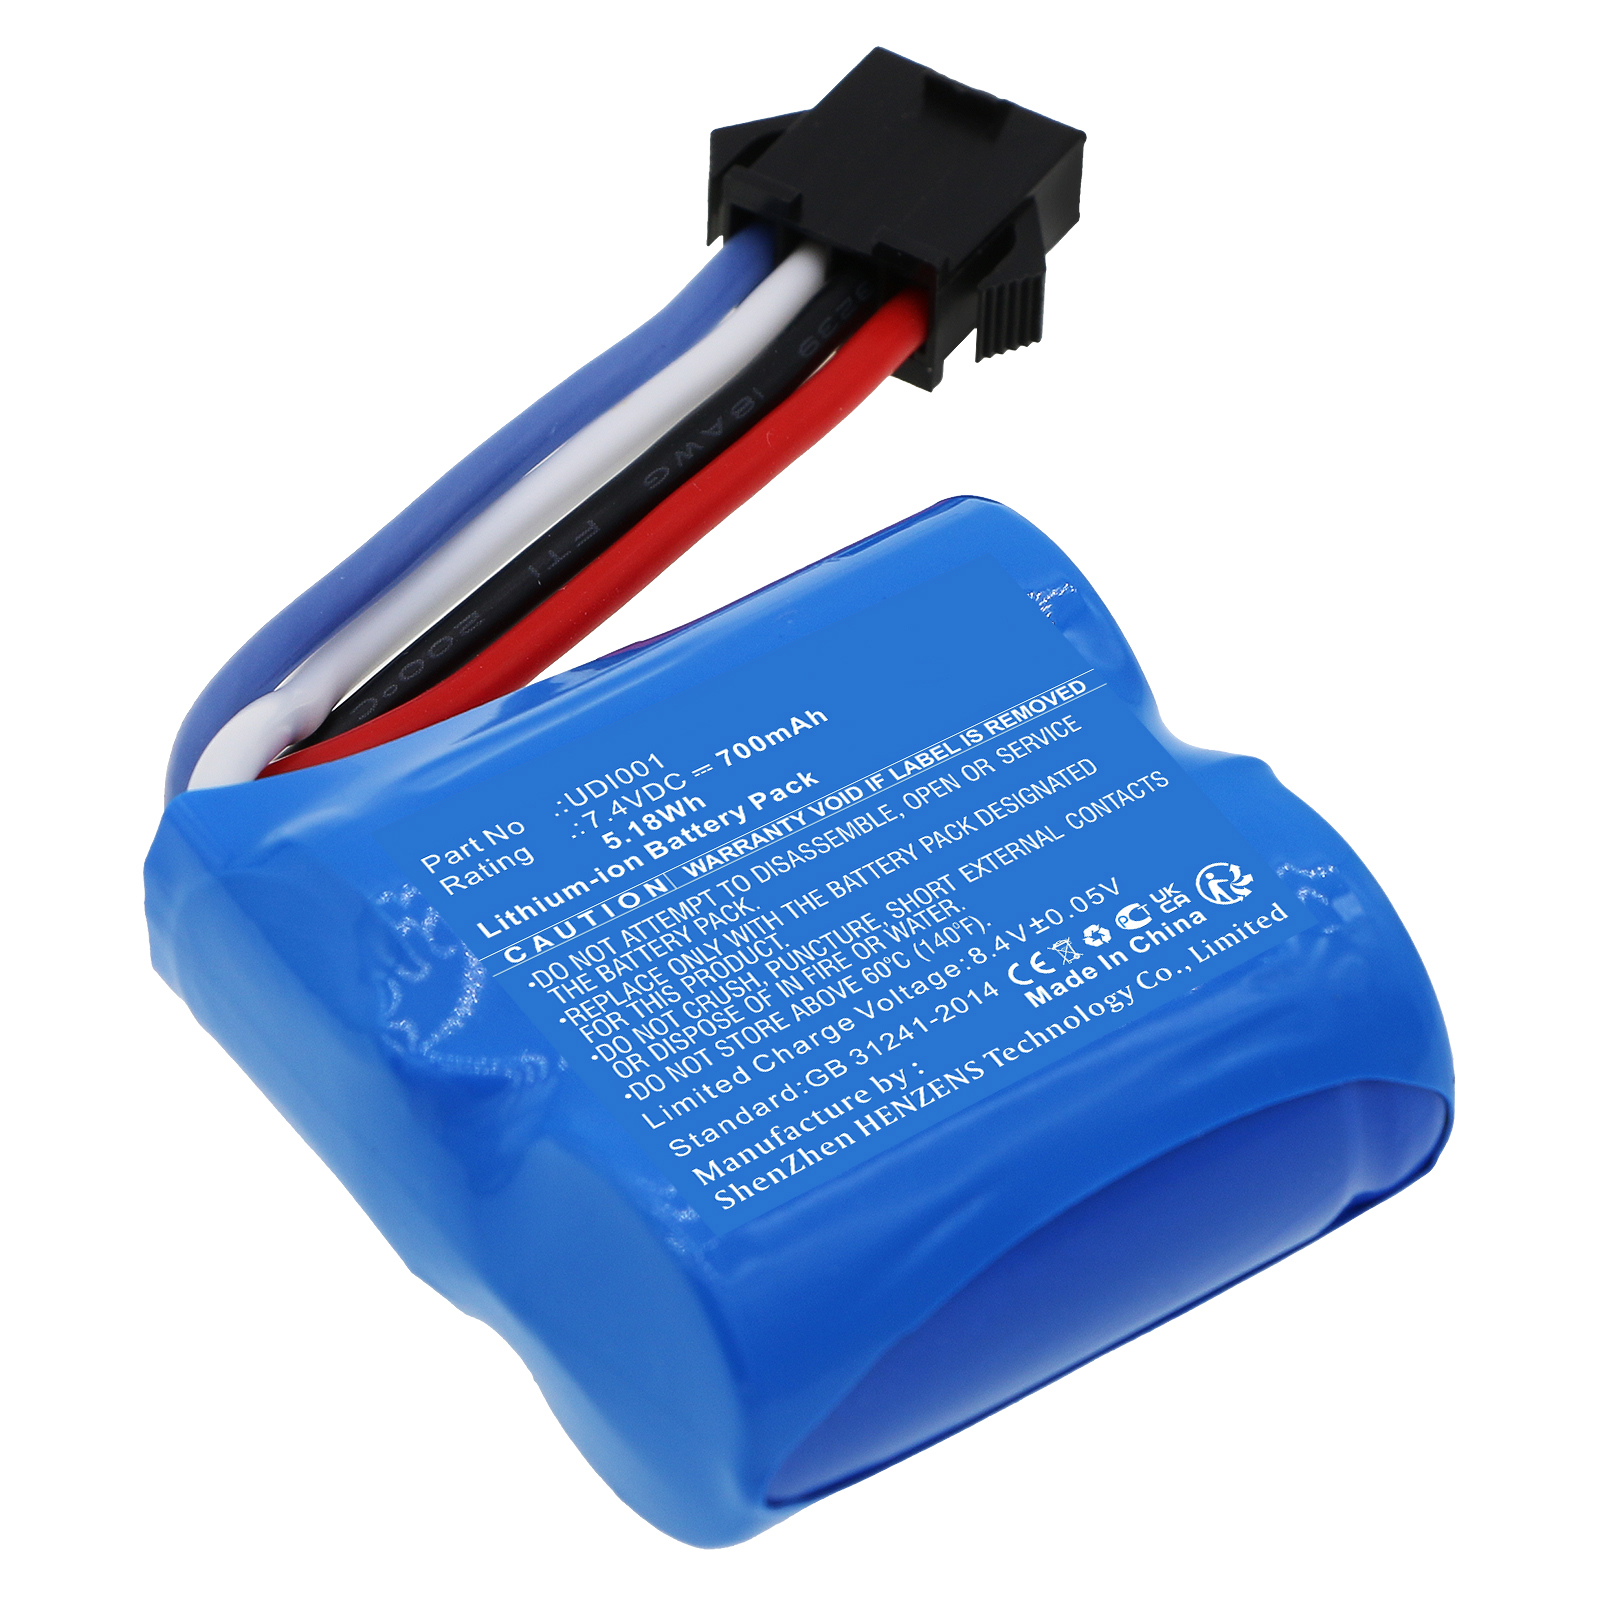 Synergy Digital Robot Battery, Compatible with Huanqi 960 Robot Battery (Li-ion, 7.4V, 700mAh)